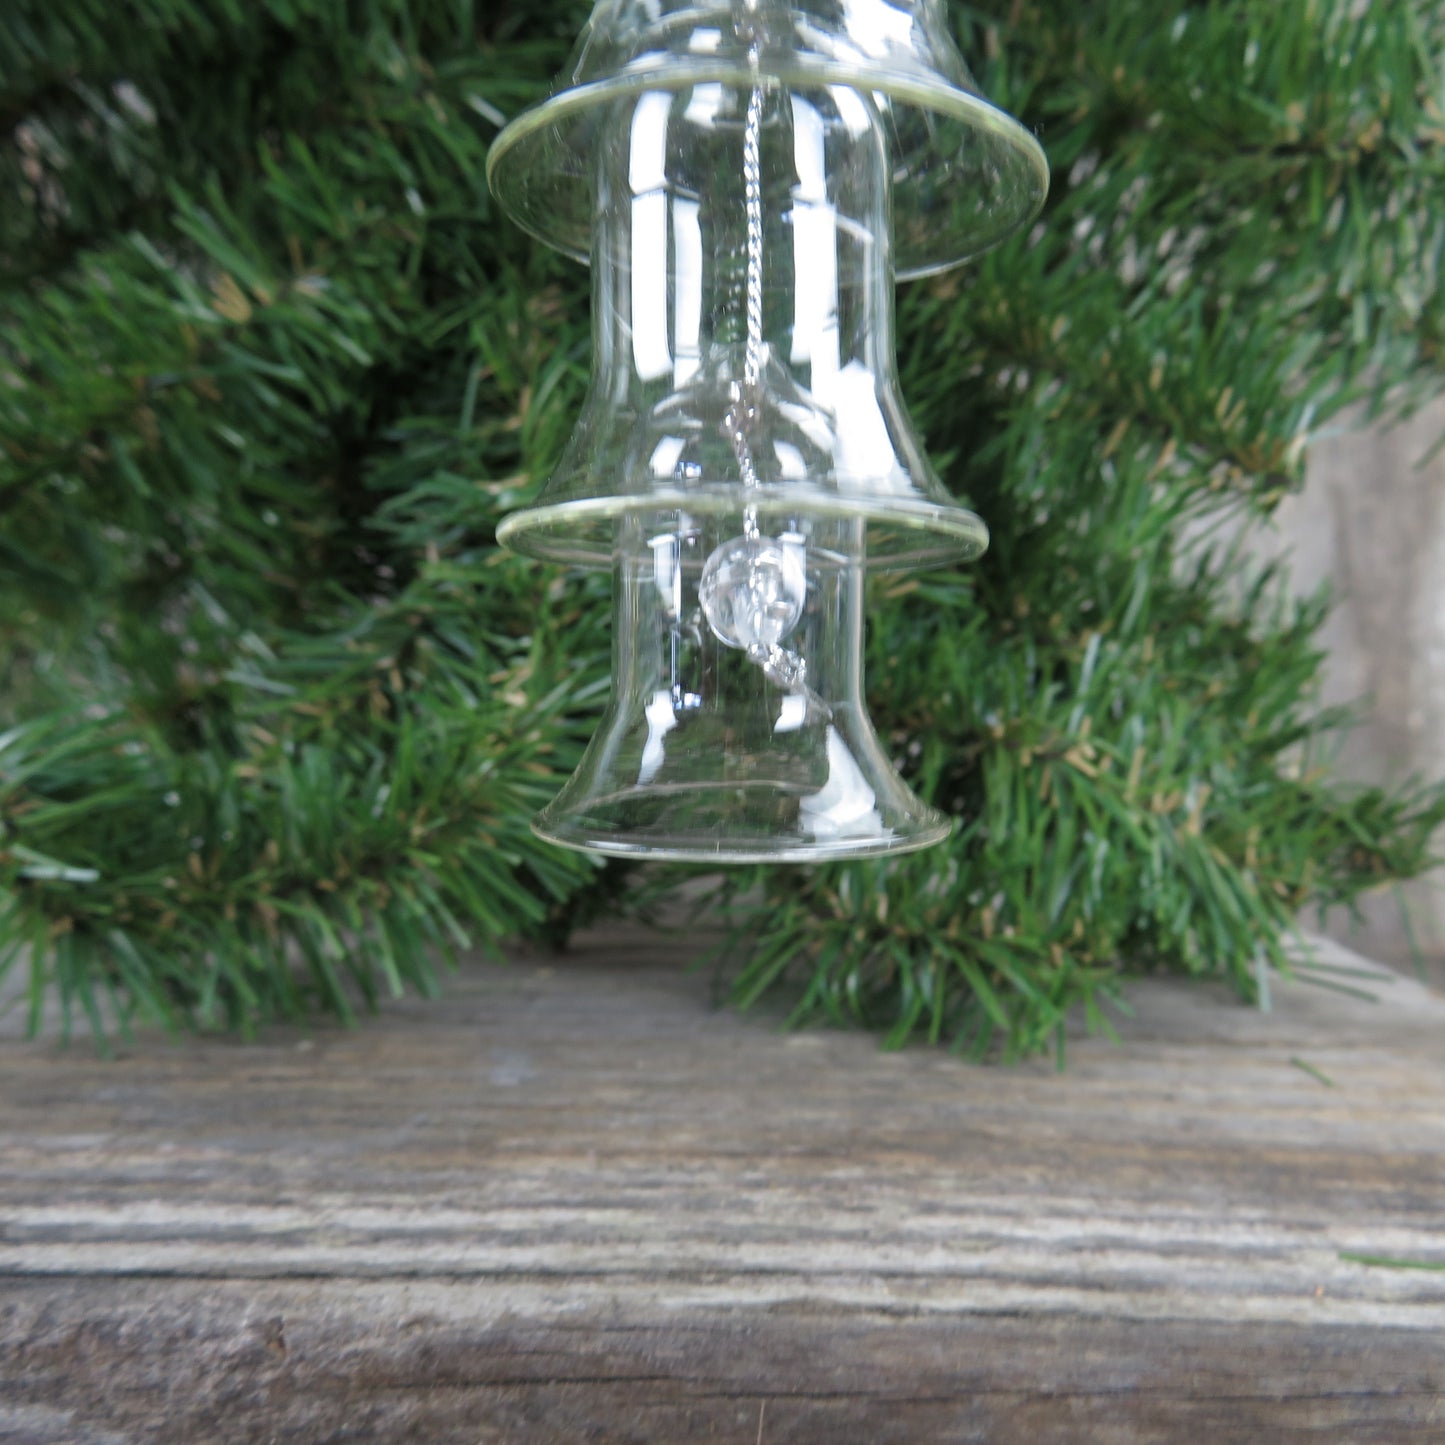 Vintage Glass Tiered Bell Ornament Smooth Edged Nesting Graduated Silver Cord Tier Stacked Bell Ornament